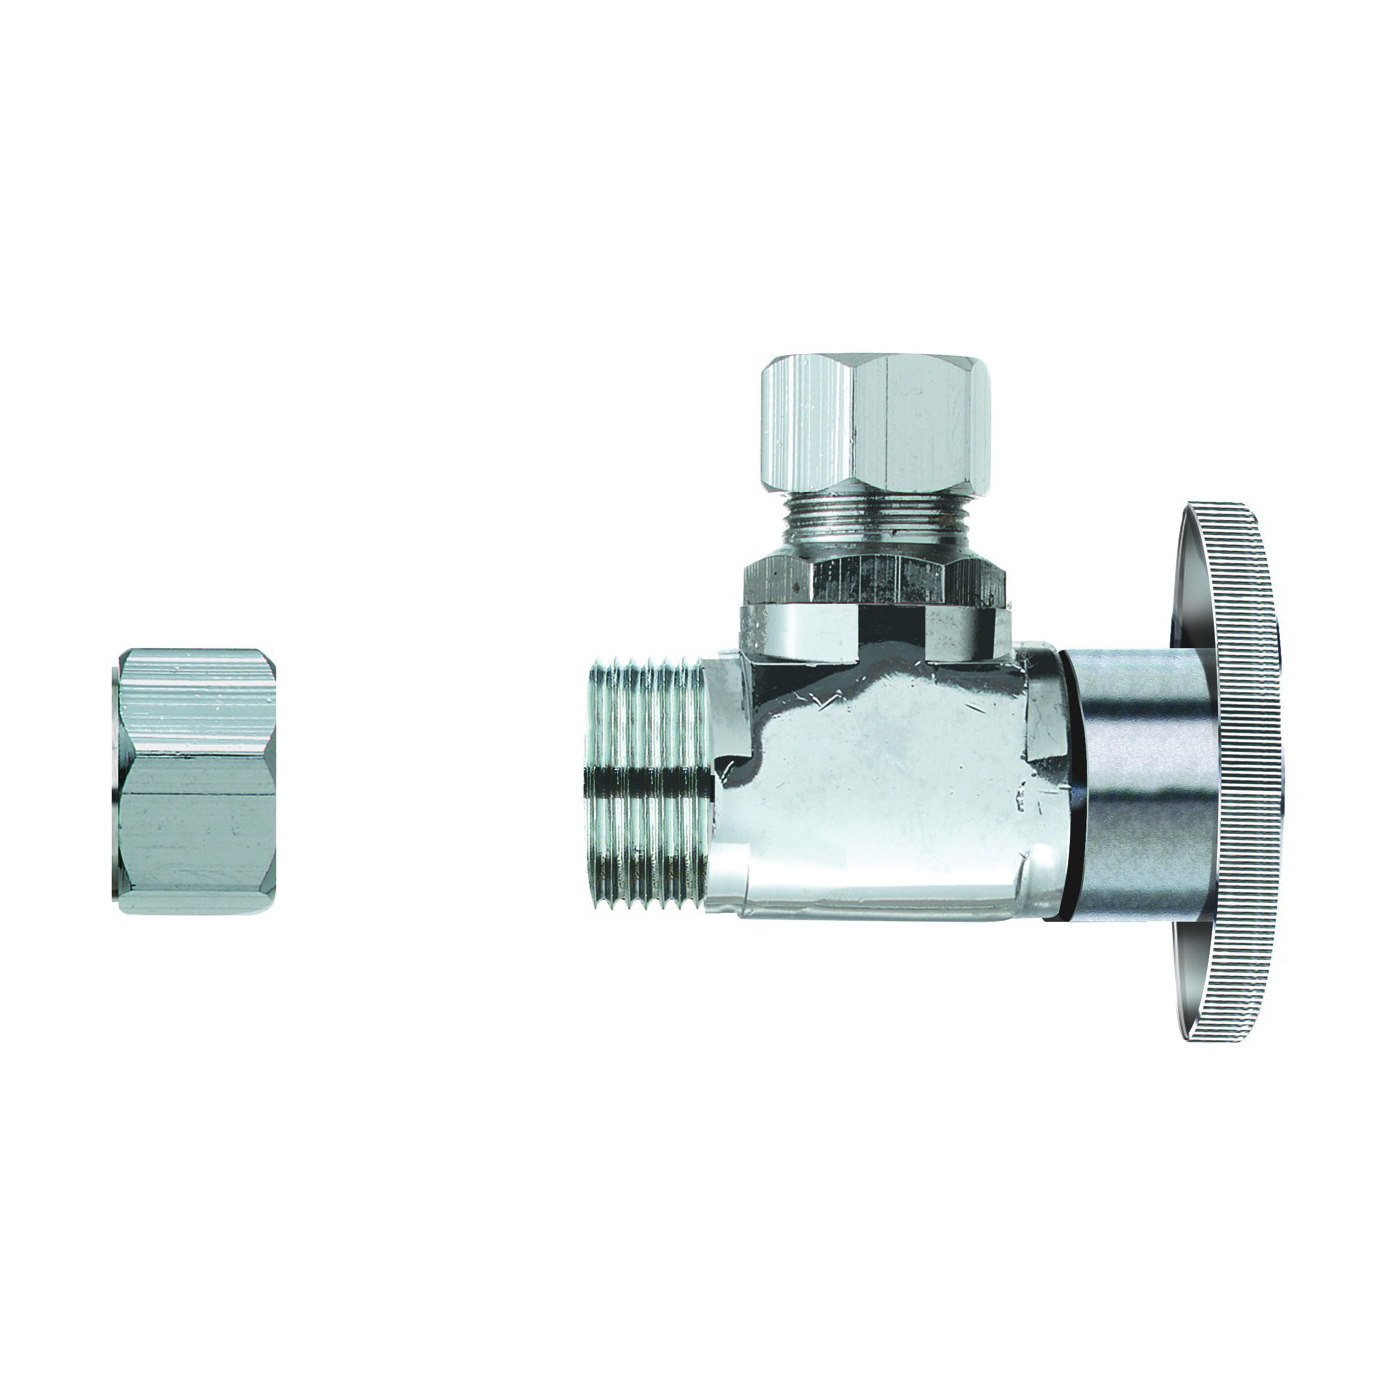 PP32-1PCLF Transition Valve, 1/2 x 3/8 in Connection, CPVC x Tube, CPVC Body